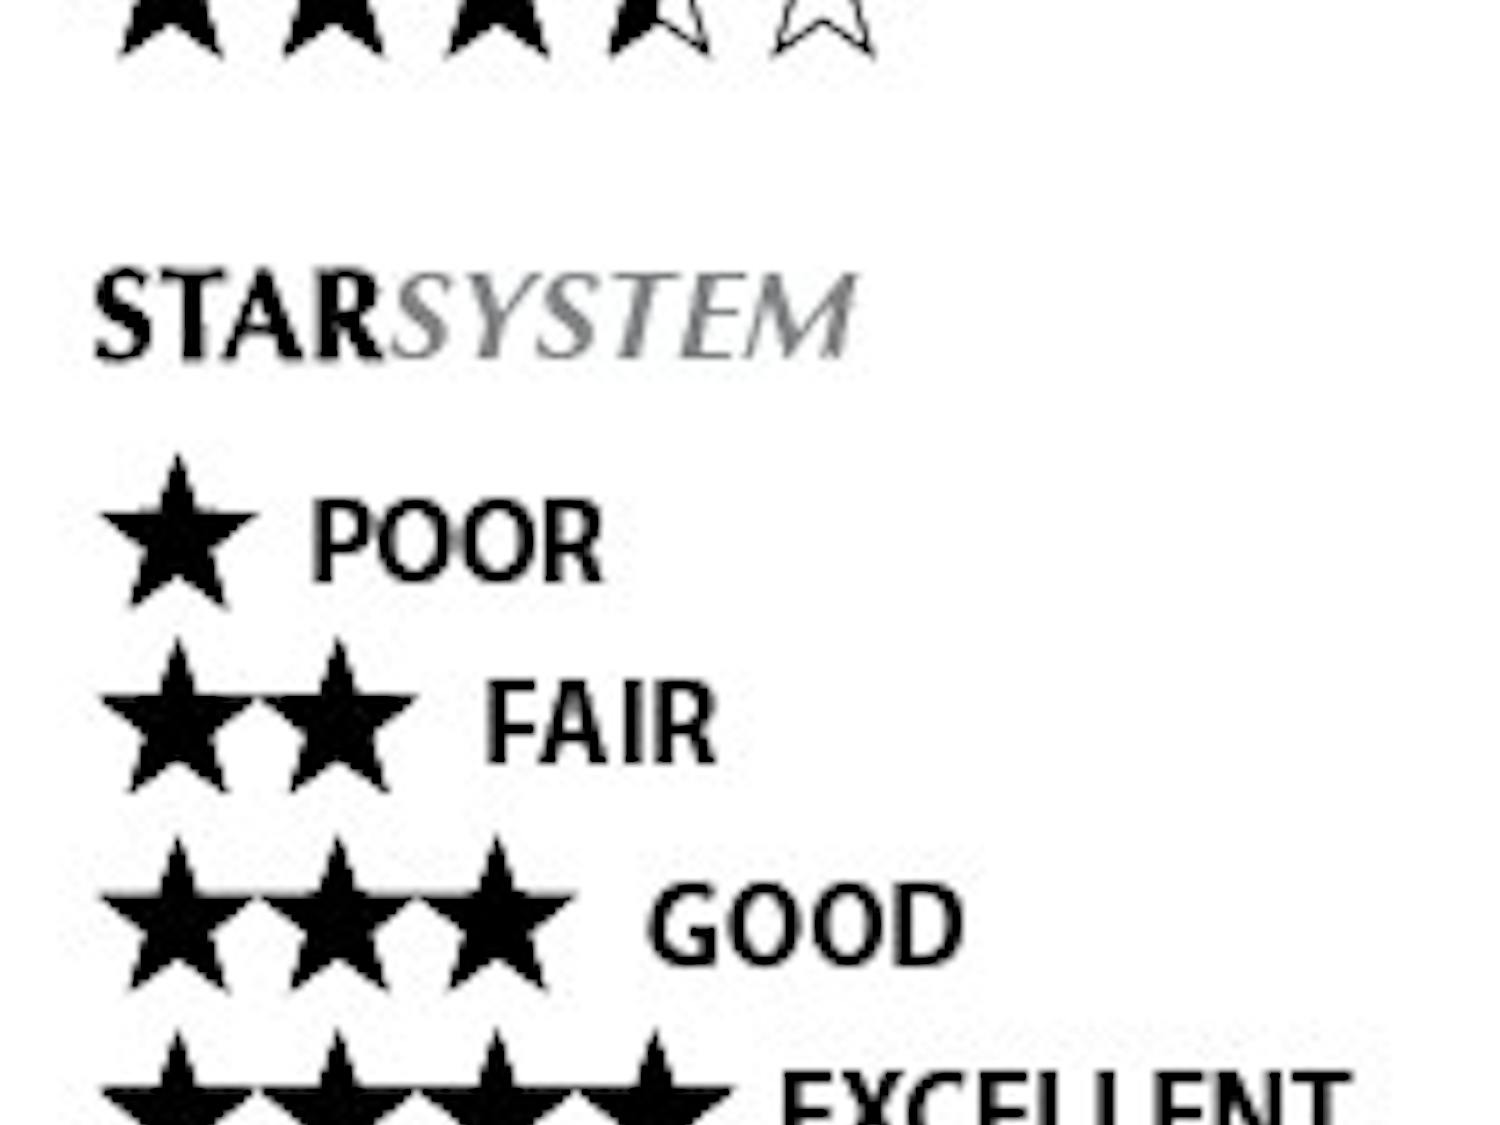 Dive gives 3.5 of 5 stars